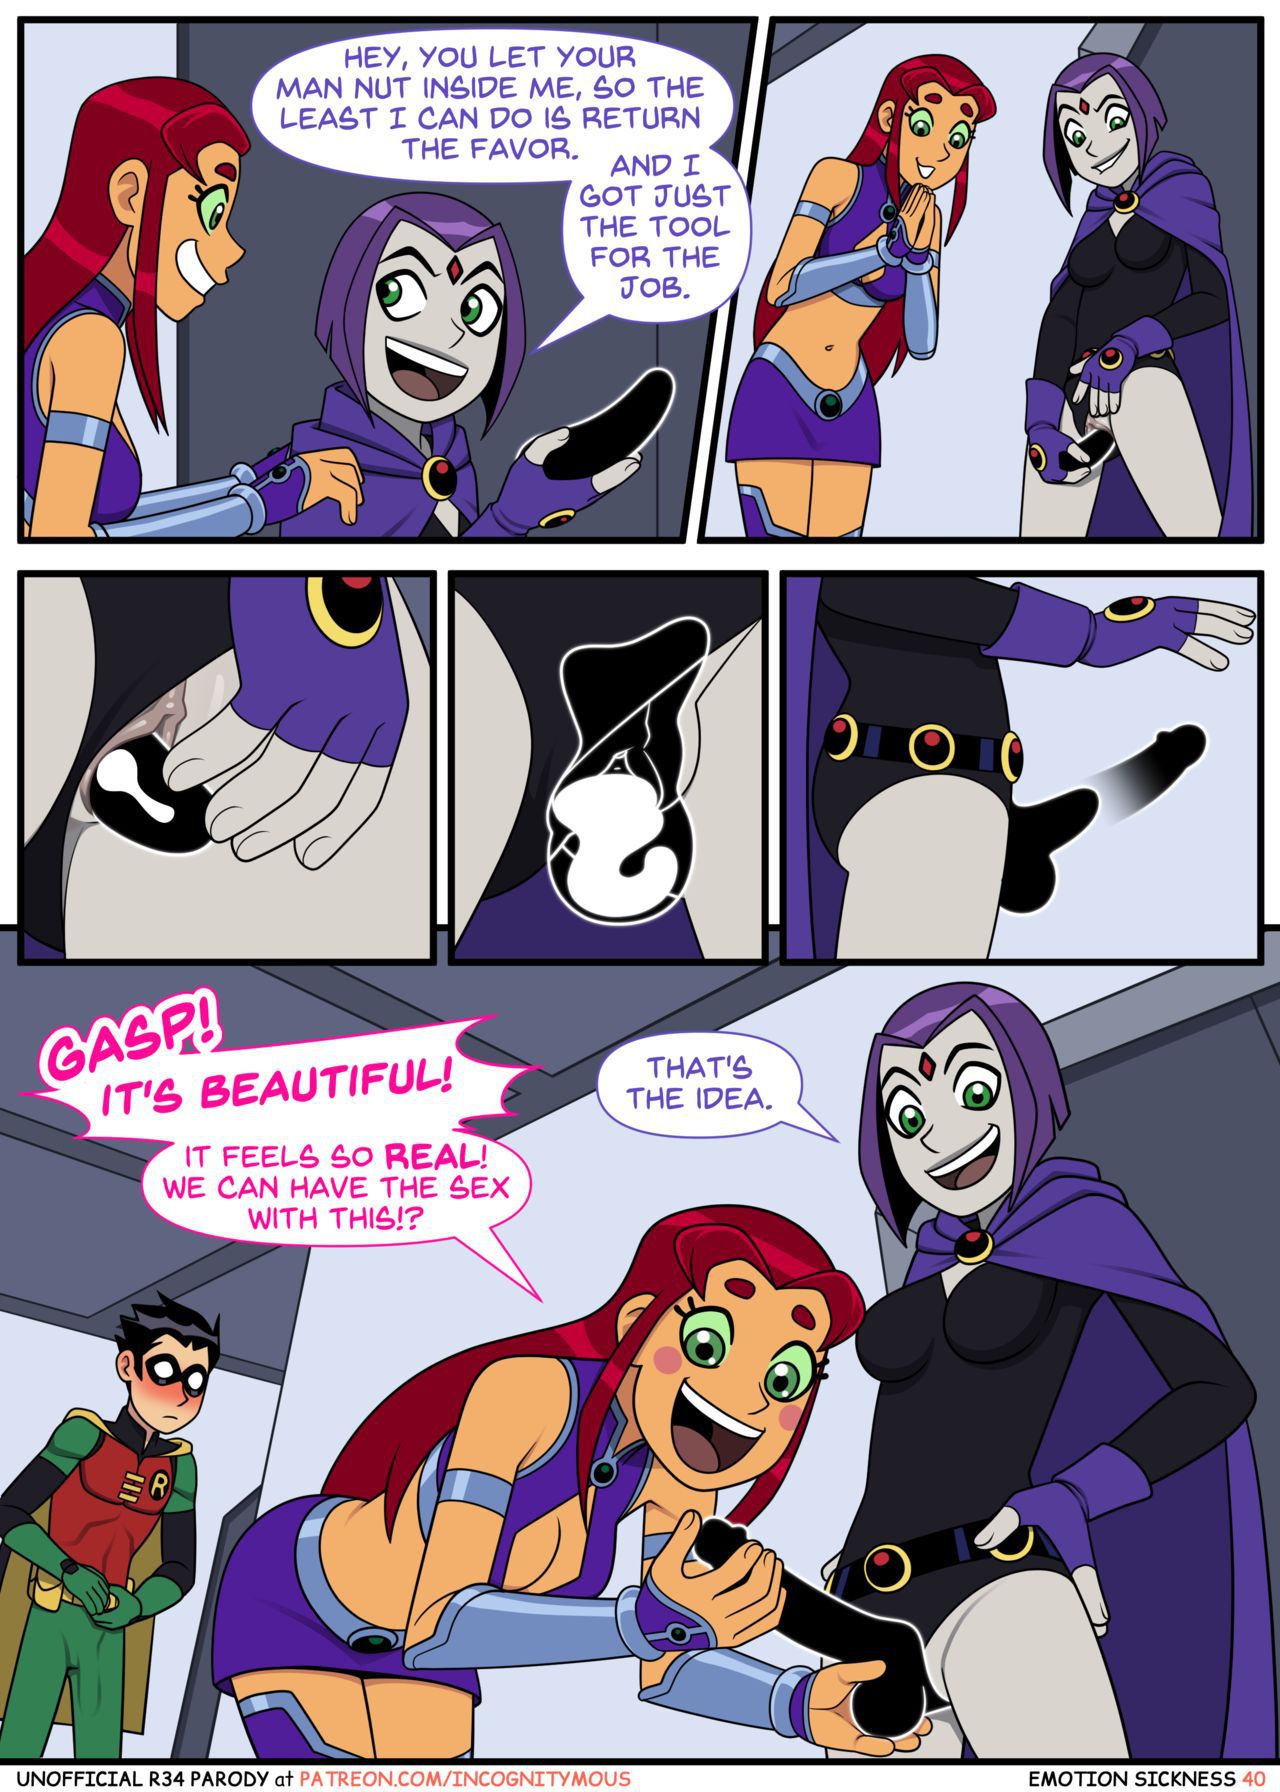 (Incognitymous) Teen Titans - Emotion Sickness(ongoing) 39